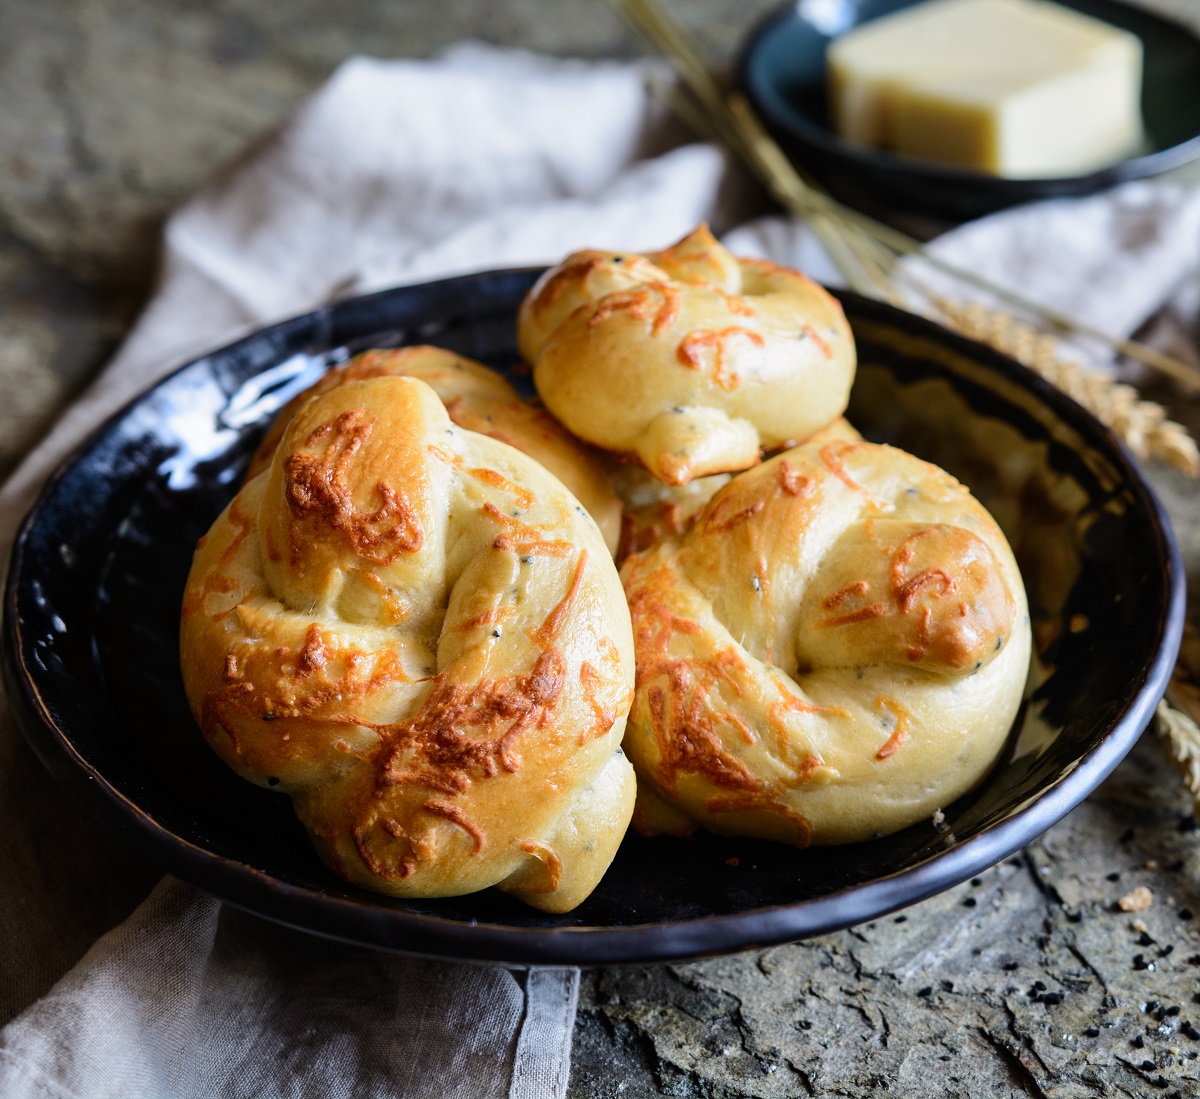 Freshly,Baked,Knots,With,Cheese,And,Black,Cumin,Seeds